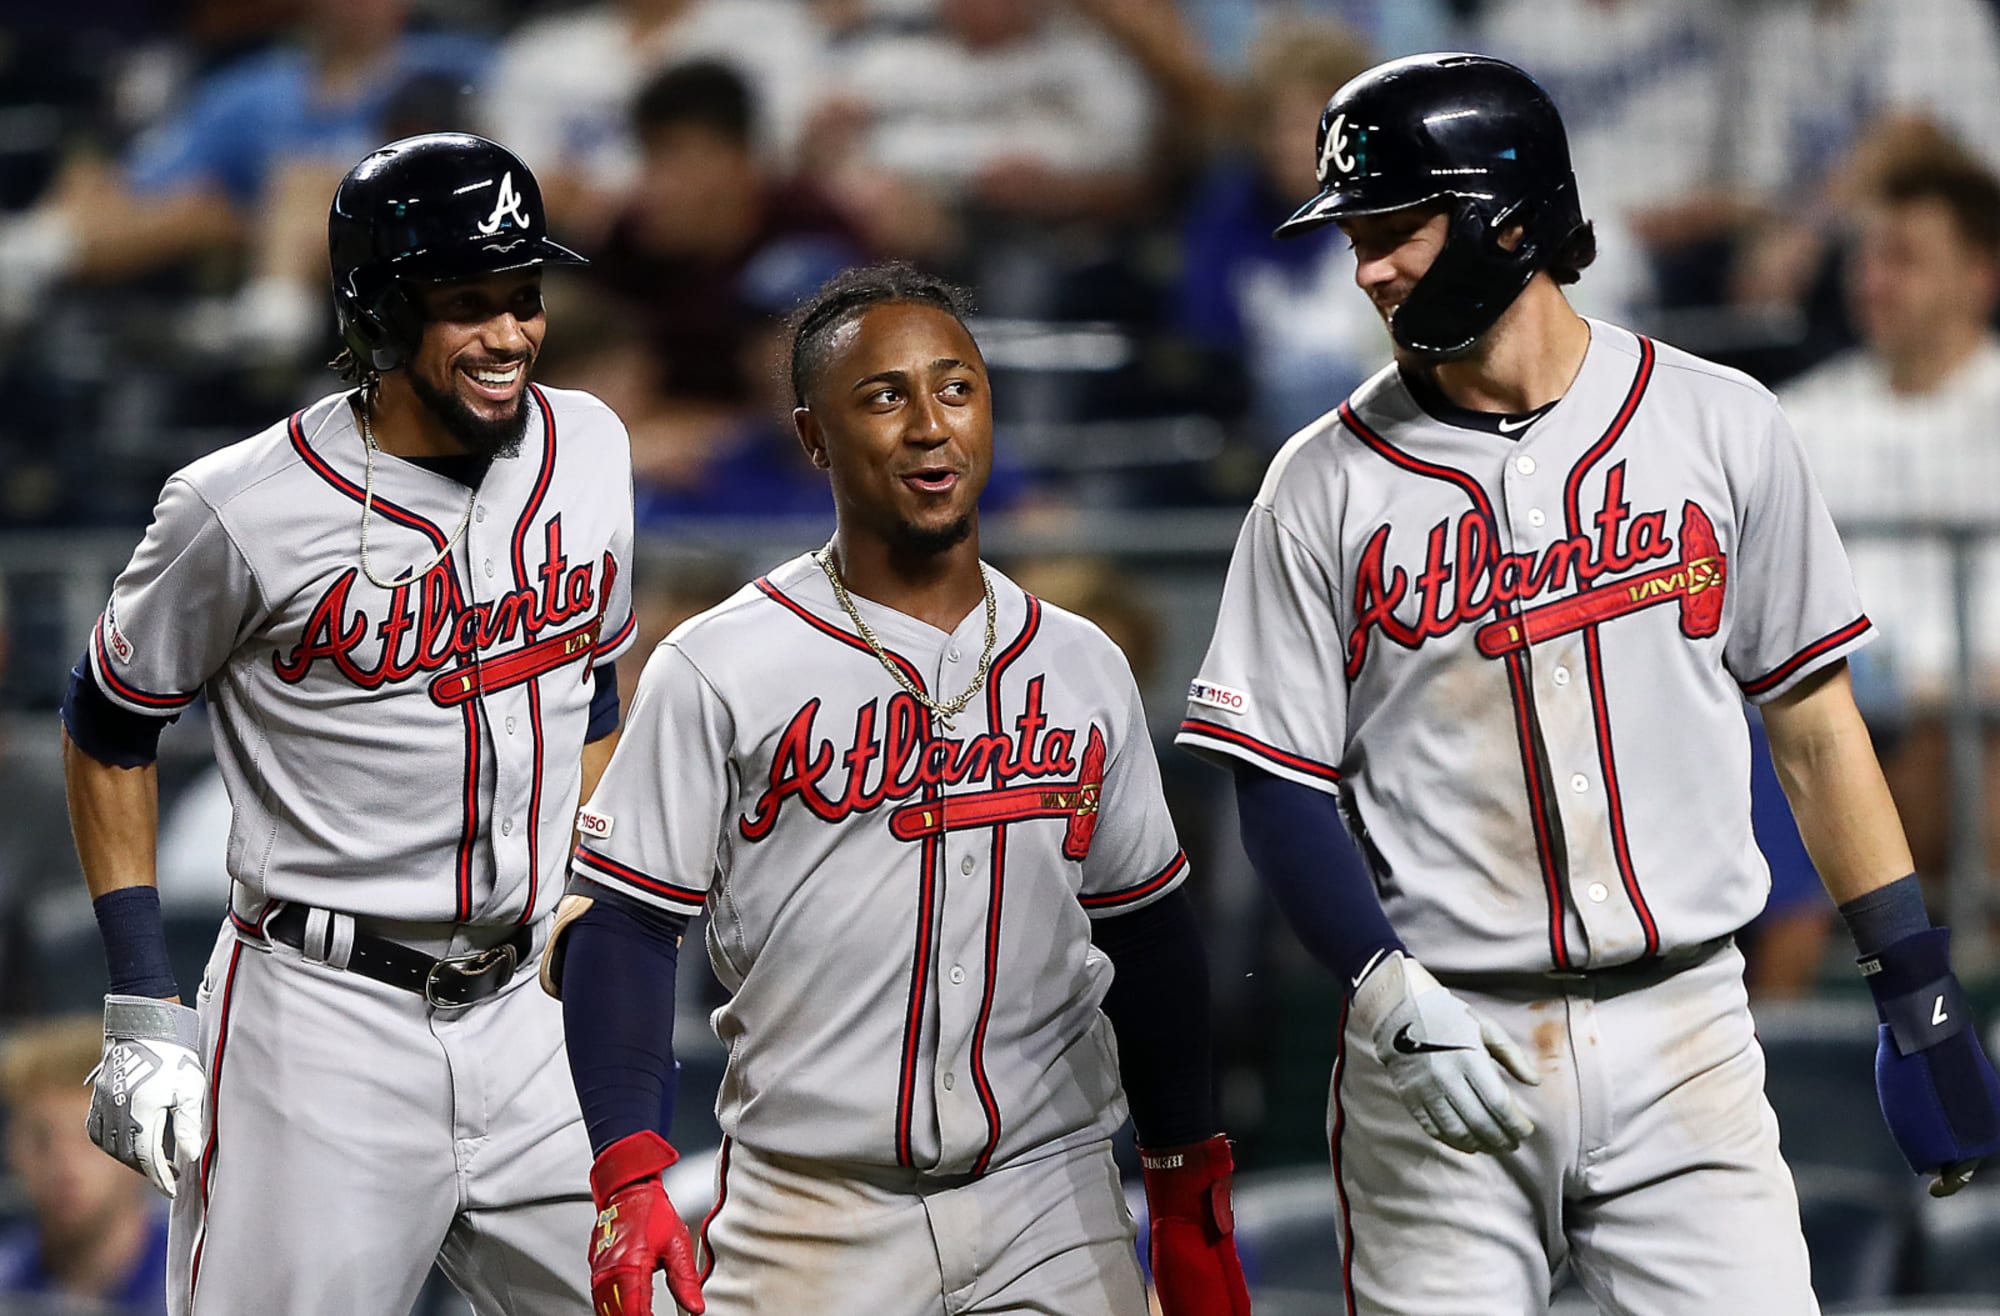 Atlanta Braves 2017 Outfield: What to do?